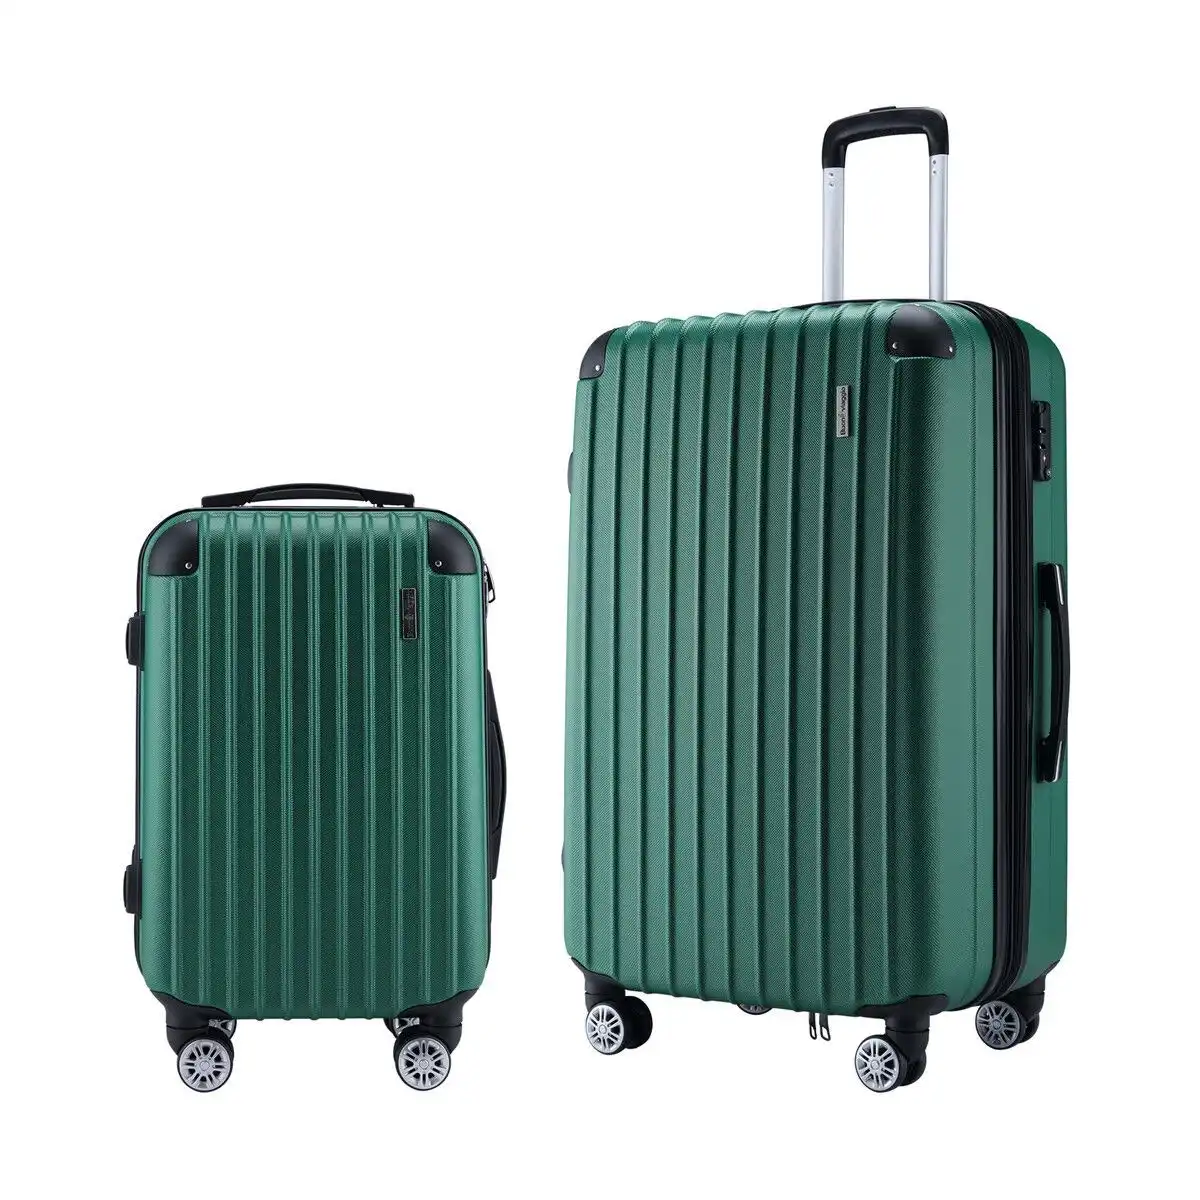 Buon Viaggio 2 Piece Luggage Set Carry On Travel Suitcases Cabin Hard Shell Case Bags Lightweight Rolling Trolley with Wheels TSA Lock Green